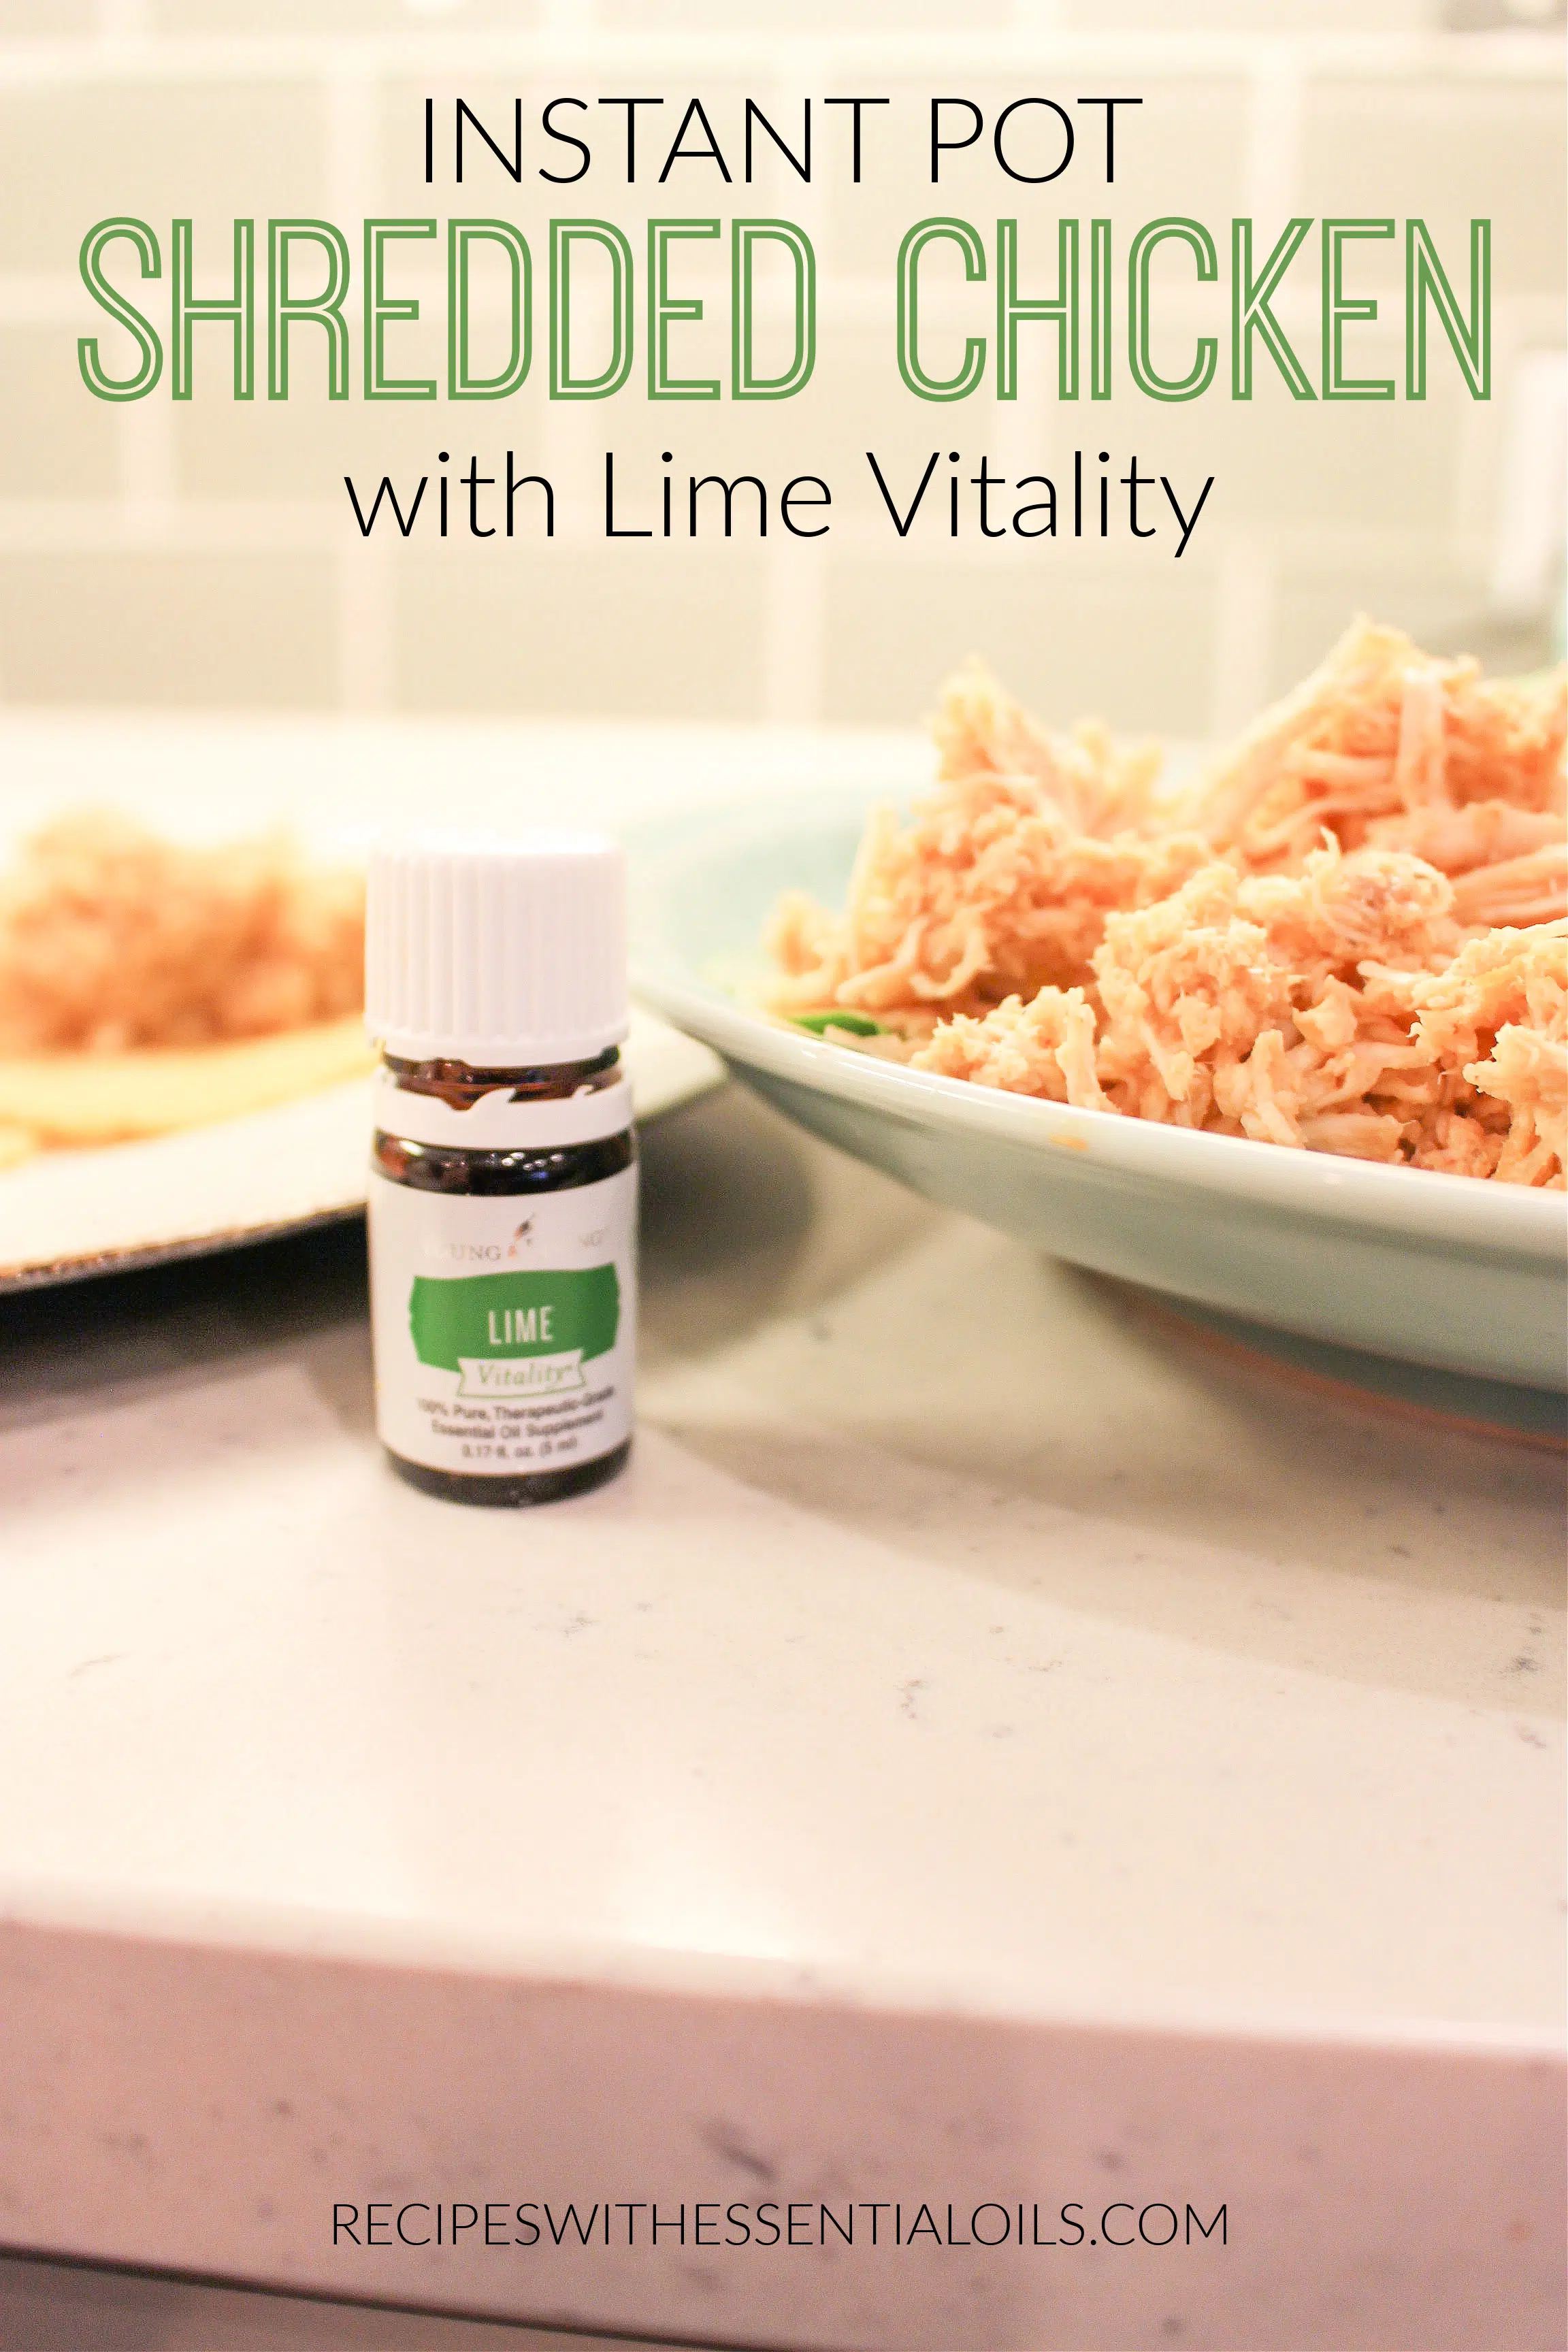 Shredded Chicken with Lime Vitality